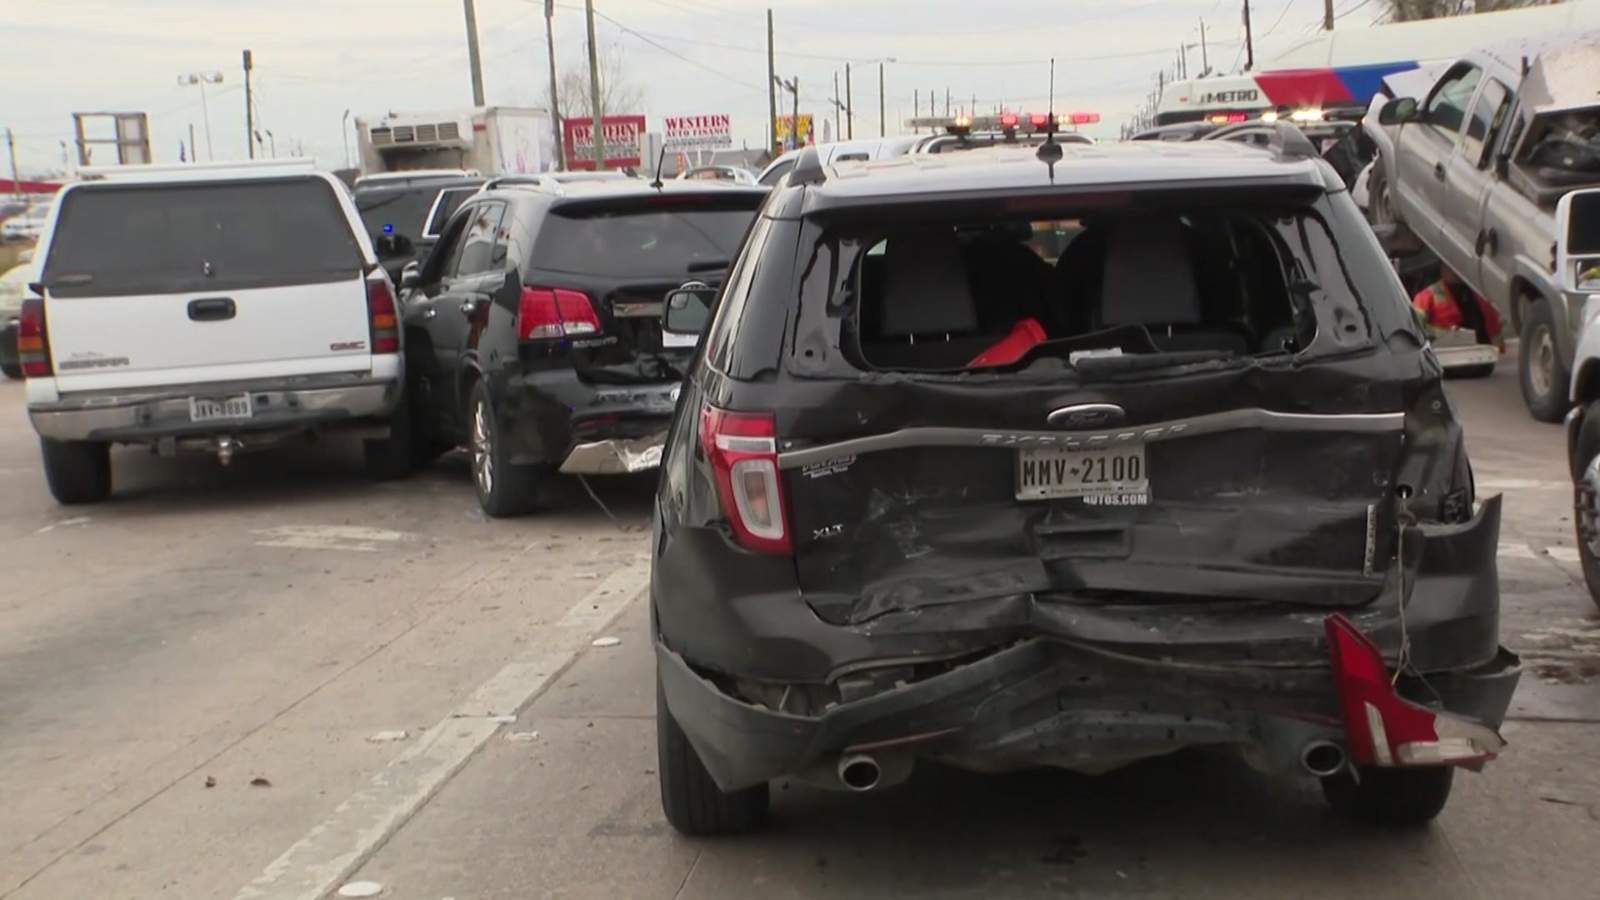 Pregnant Woman injured after high-speed chase ends in multi-vehicle crash